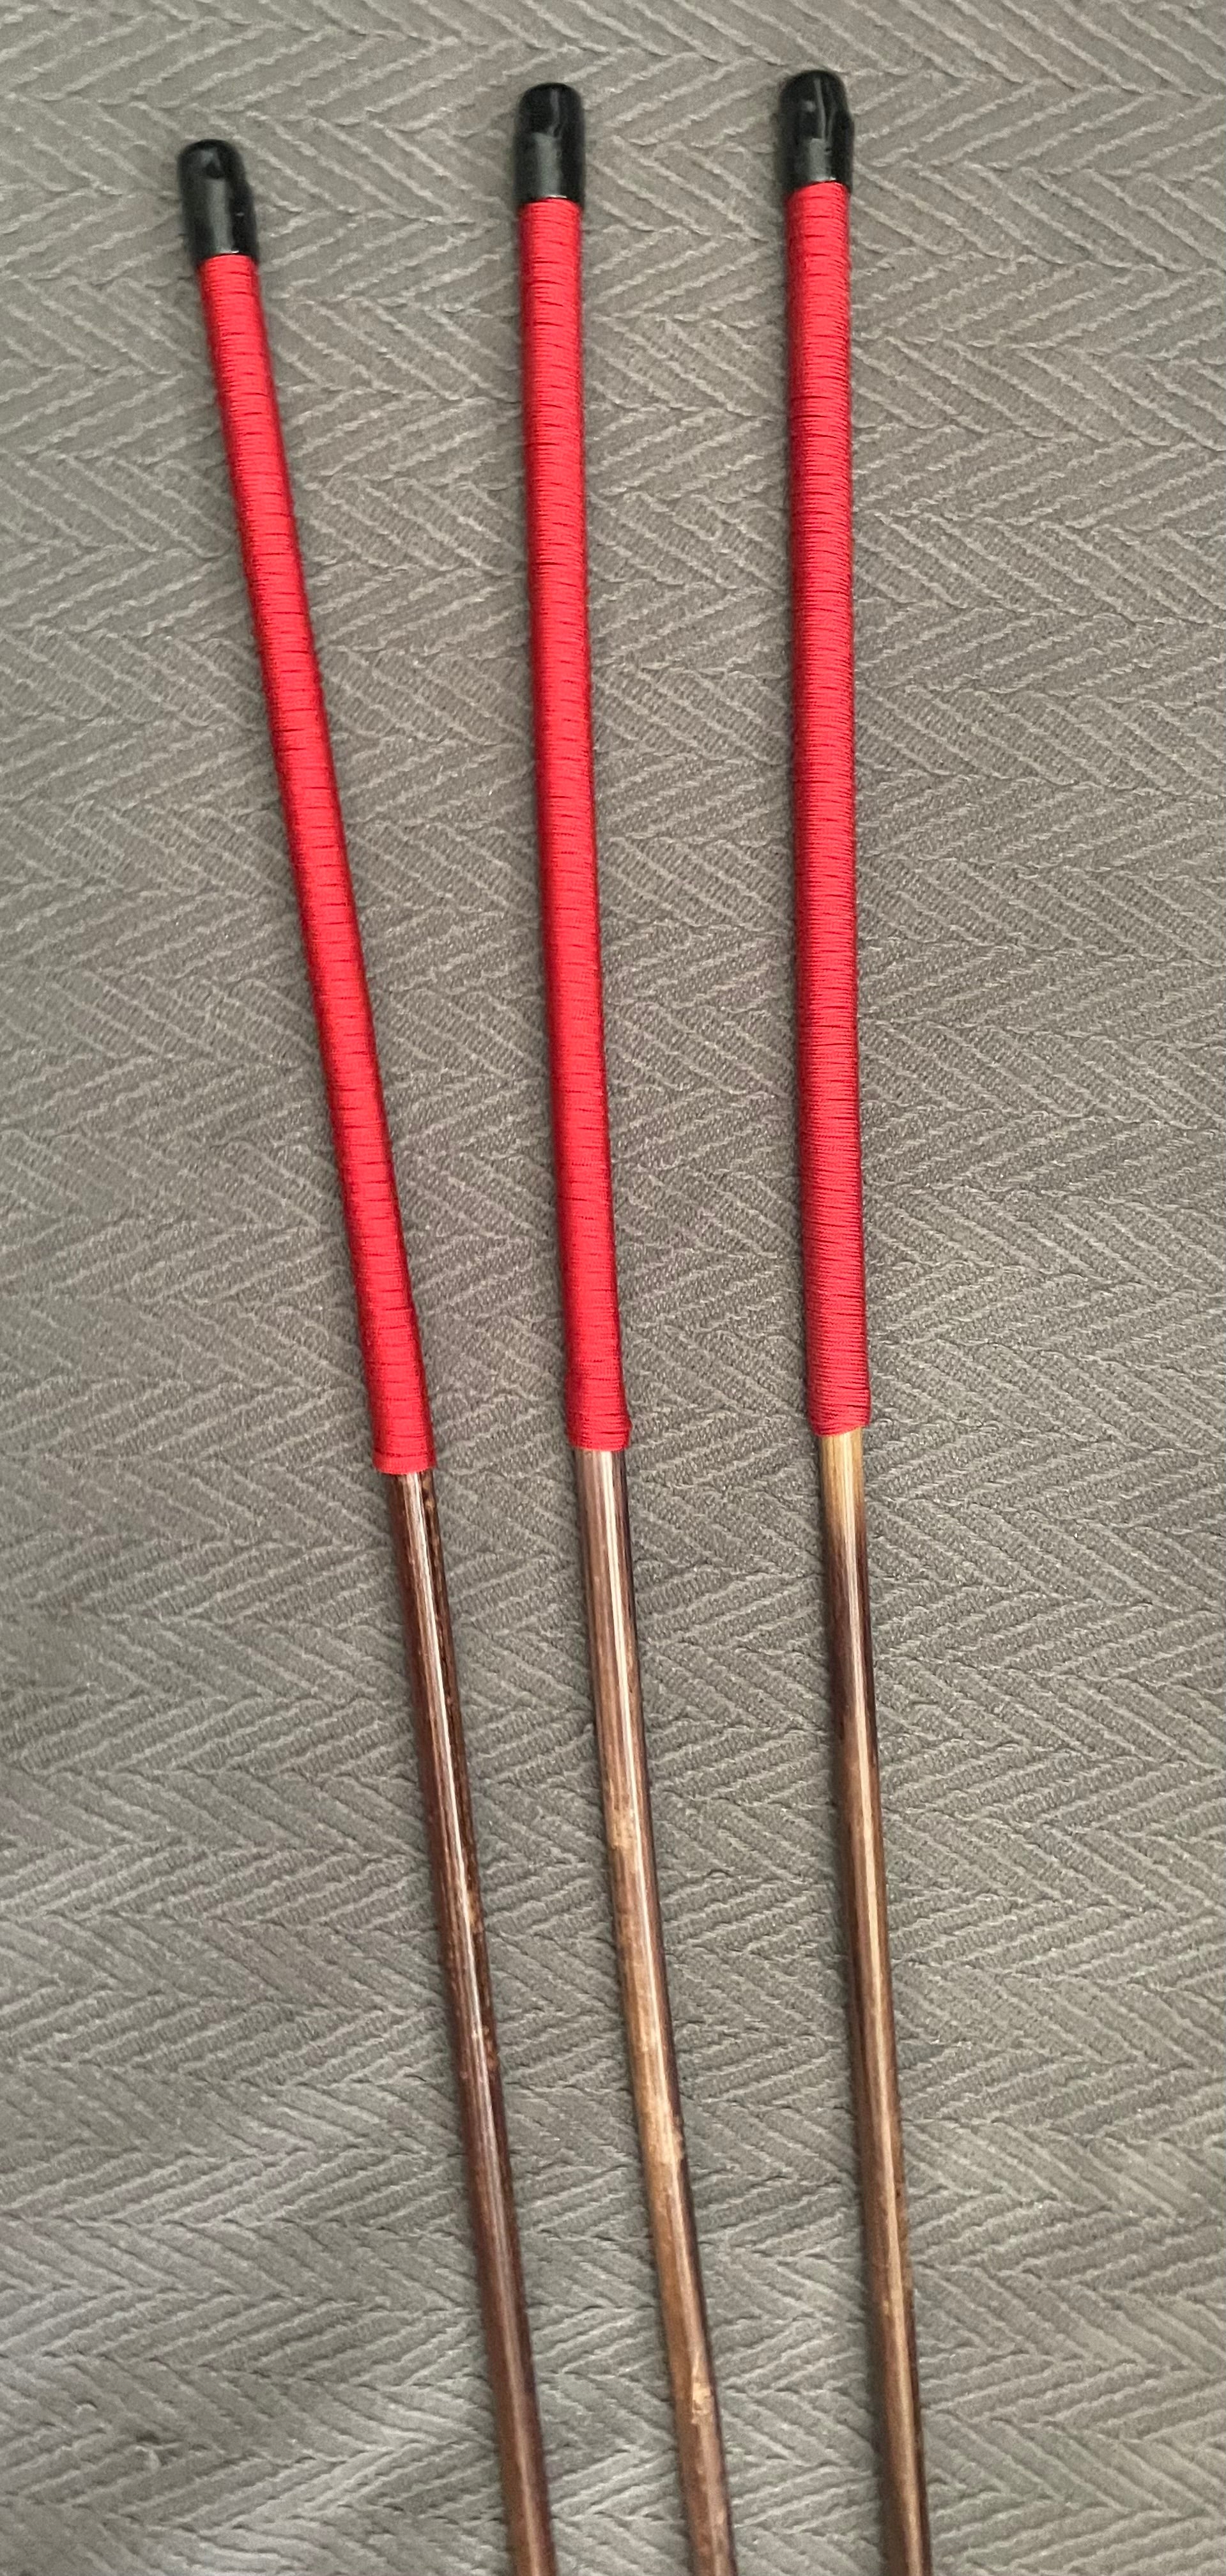 Set of 3 Knotless Smoked Dragon Canes / Ultimate No Knot Smoked Dragon Canes  - 92 to 94 cms Length - Red / Black Paracord Handles - Englishvice Canes